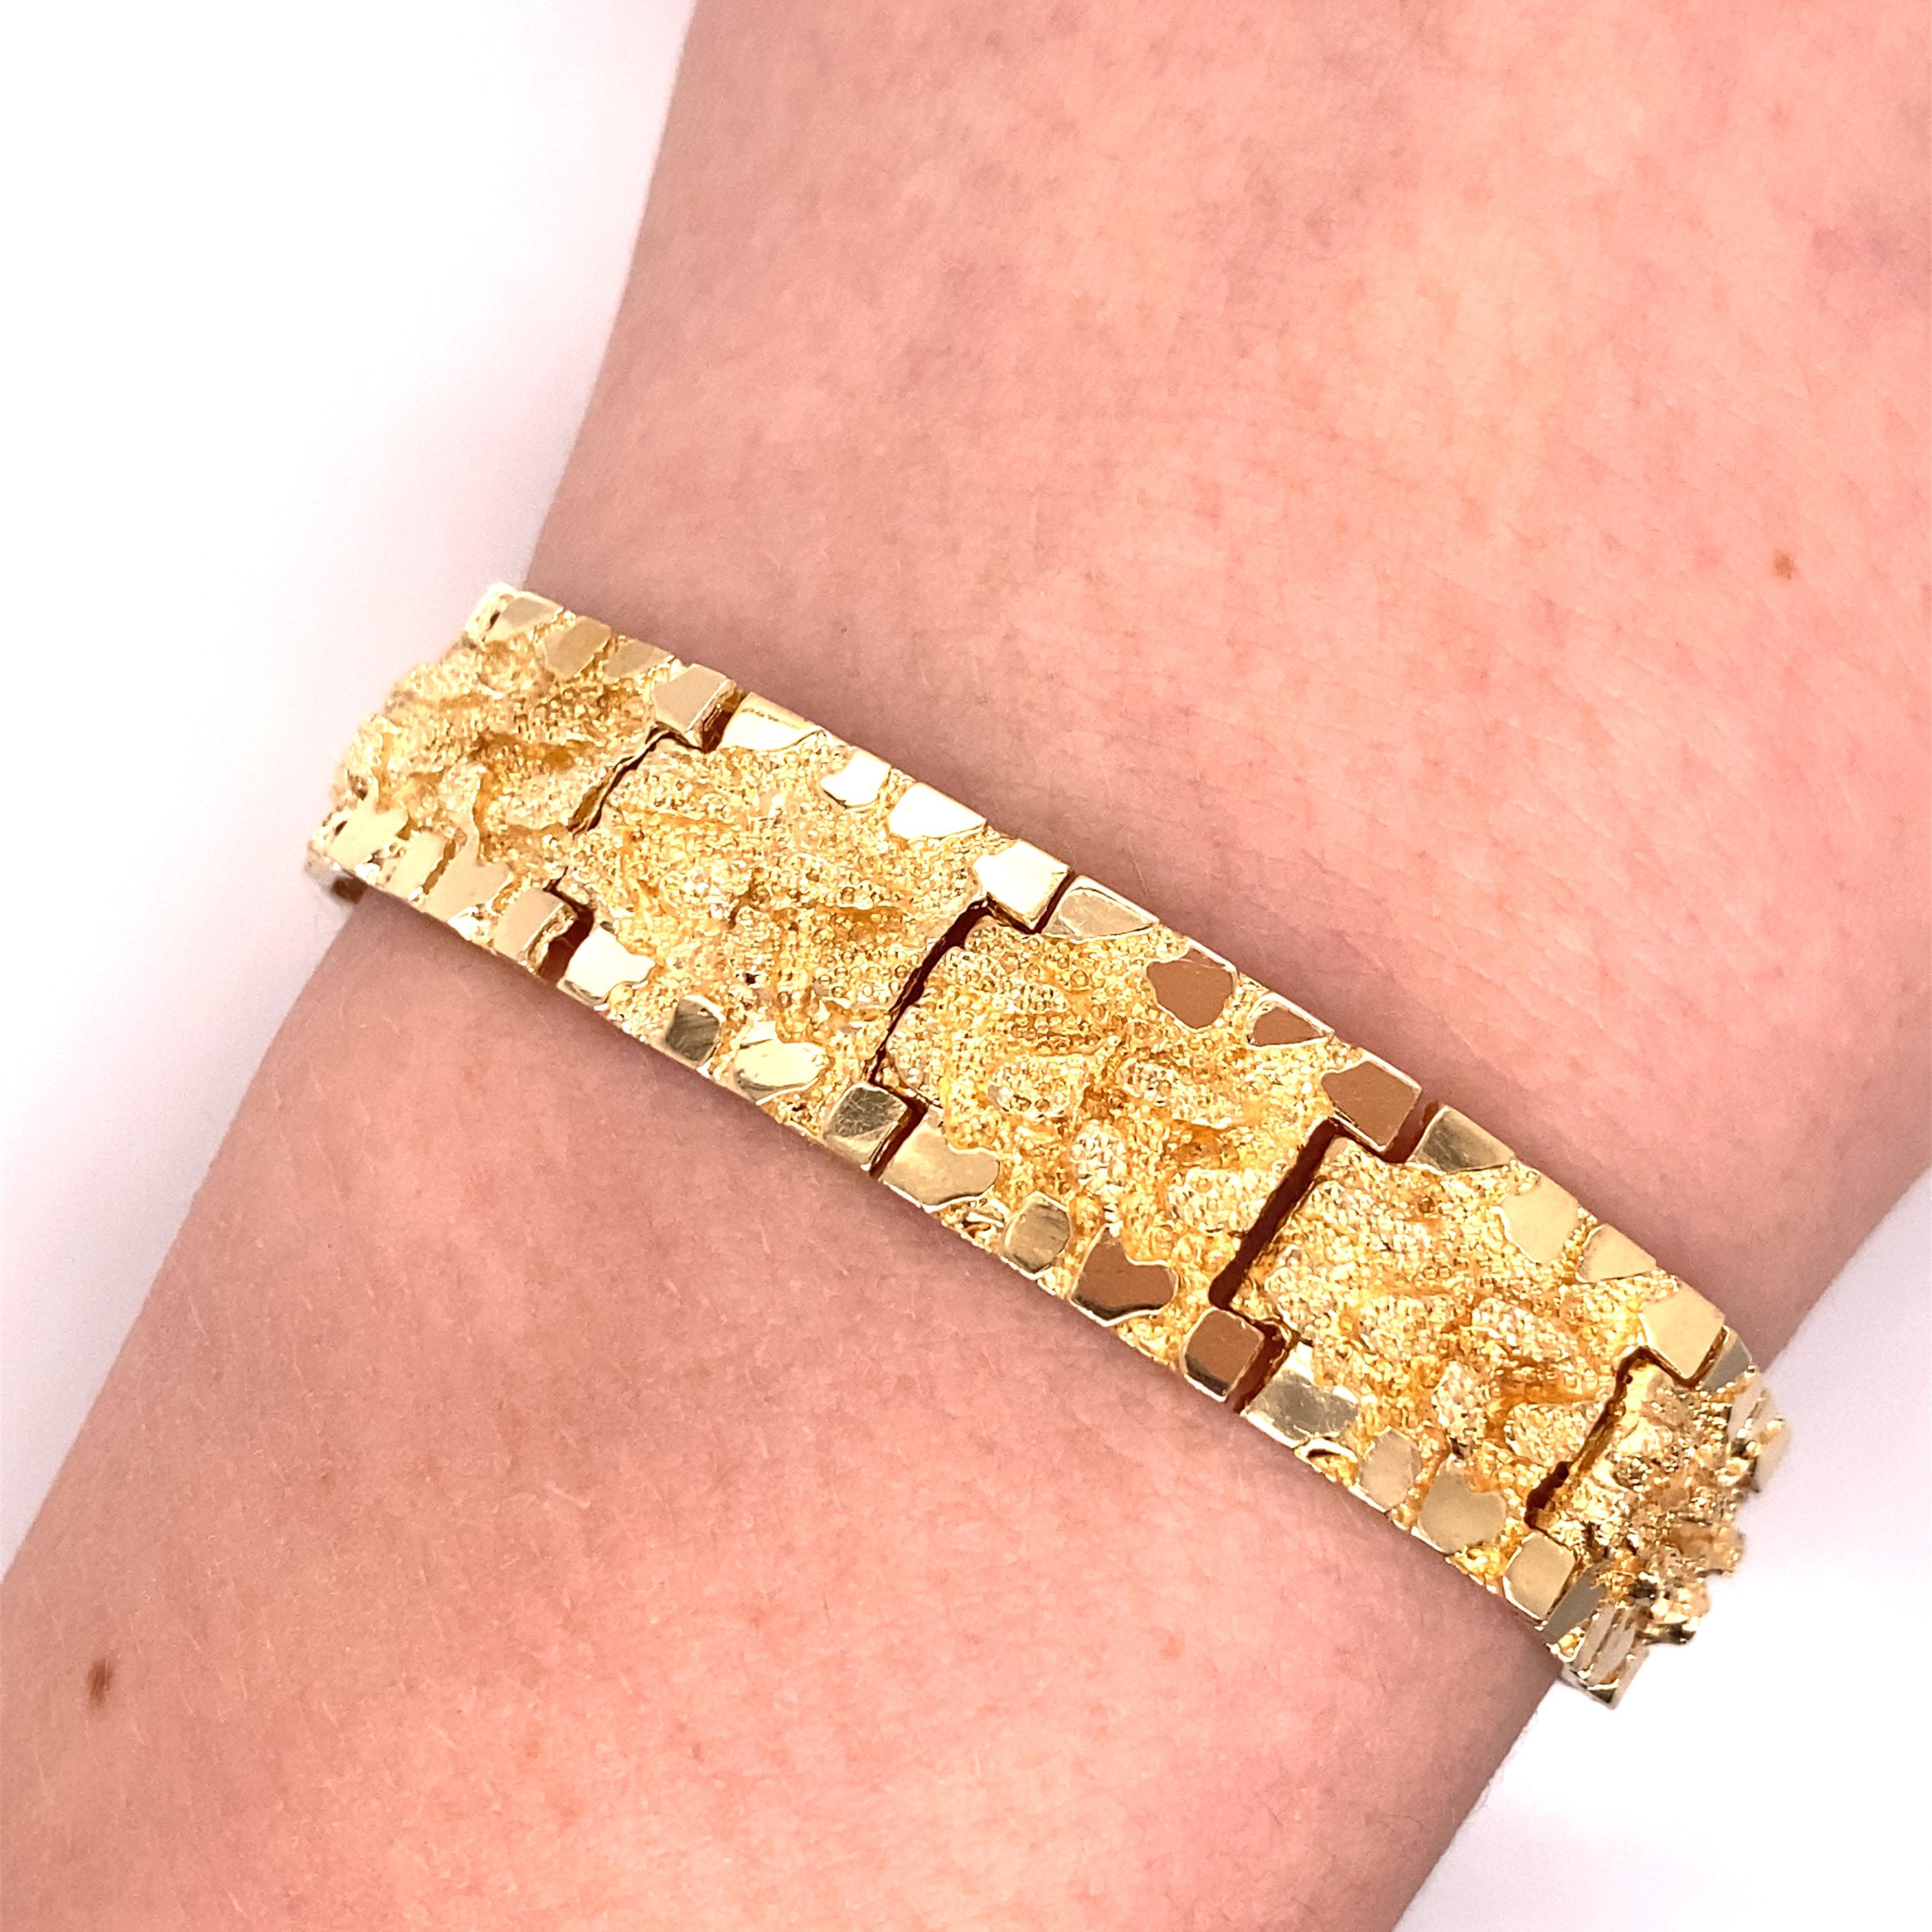 Vintage 1970's 14K Yellow Gold Nugget Bracelet - The bracelet measures .5 inches wide and 7.5inches long (7.75 inch optional length) with a fold over clasp. The bracelet weighs 26.28 grams.